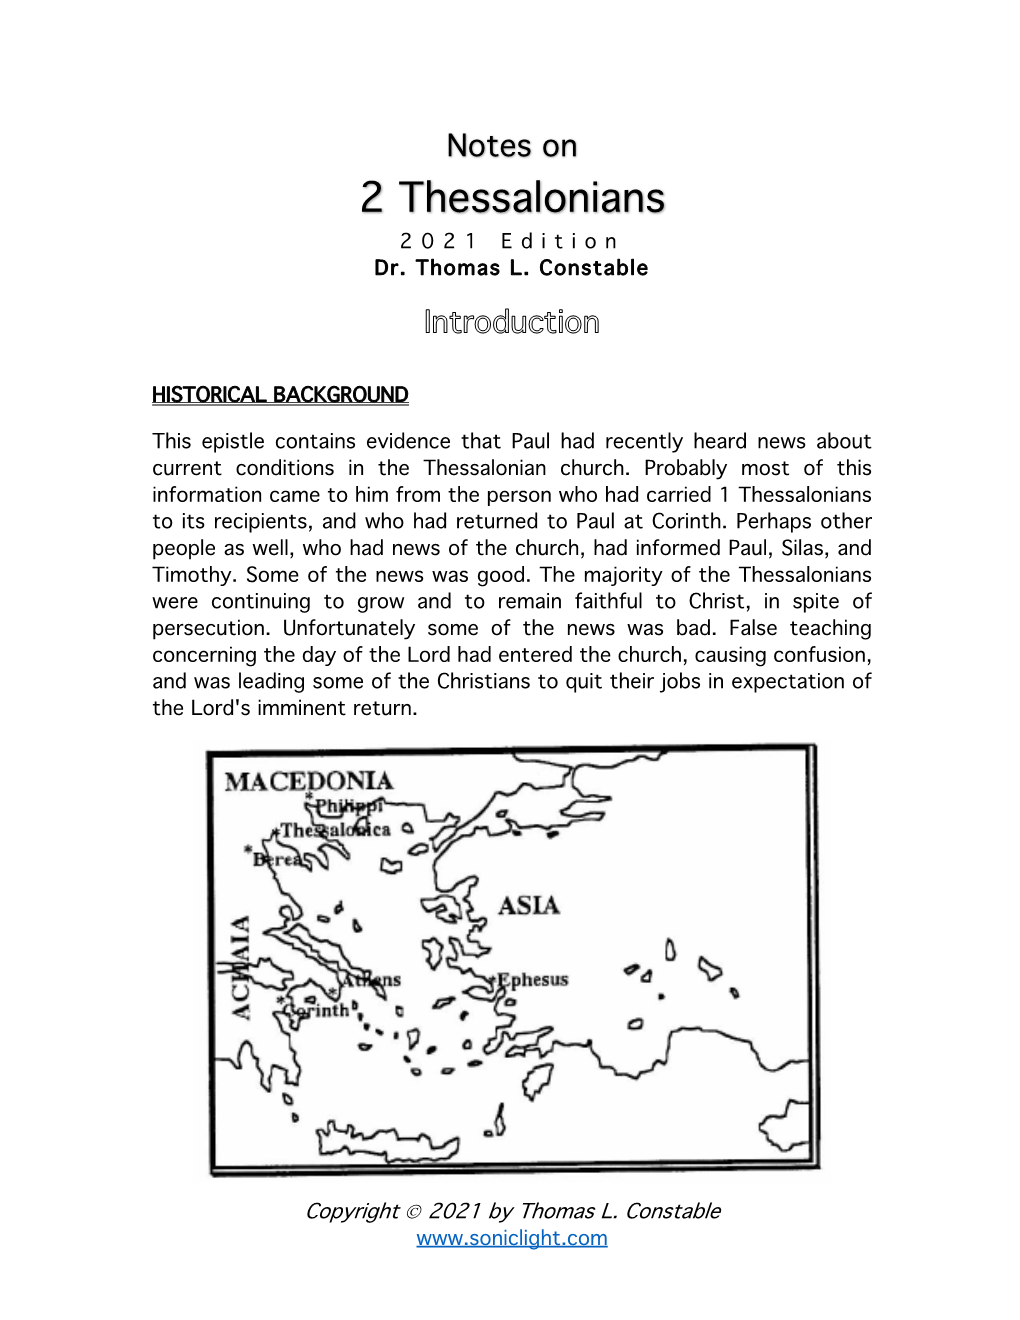 2 Thessalonians 202 1 Edition Dr